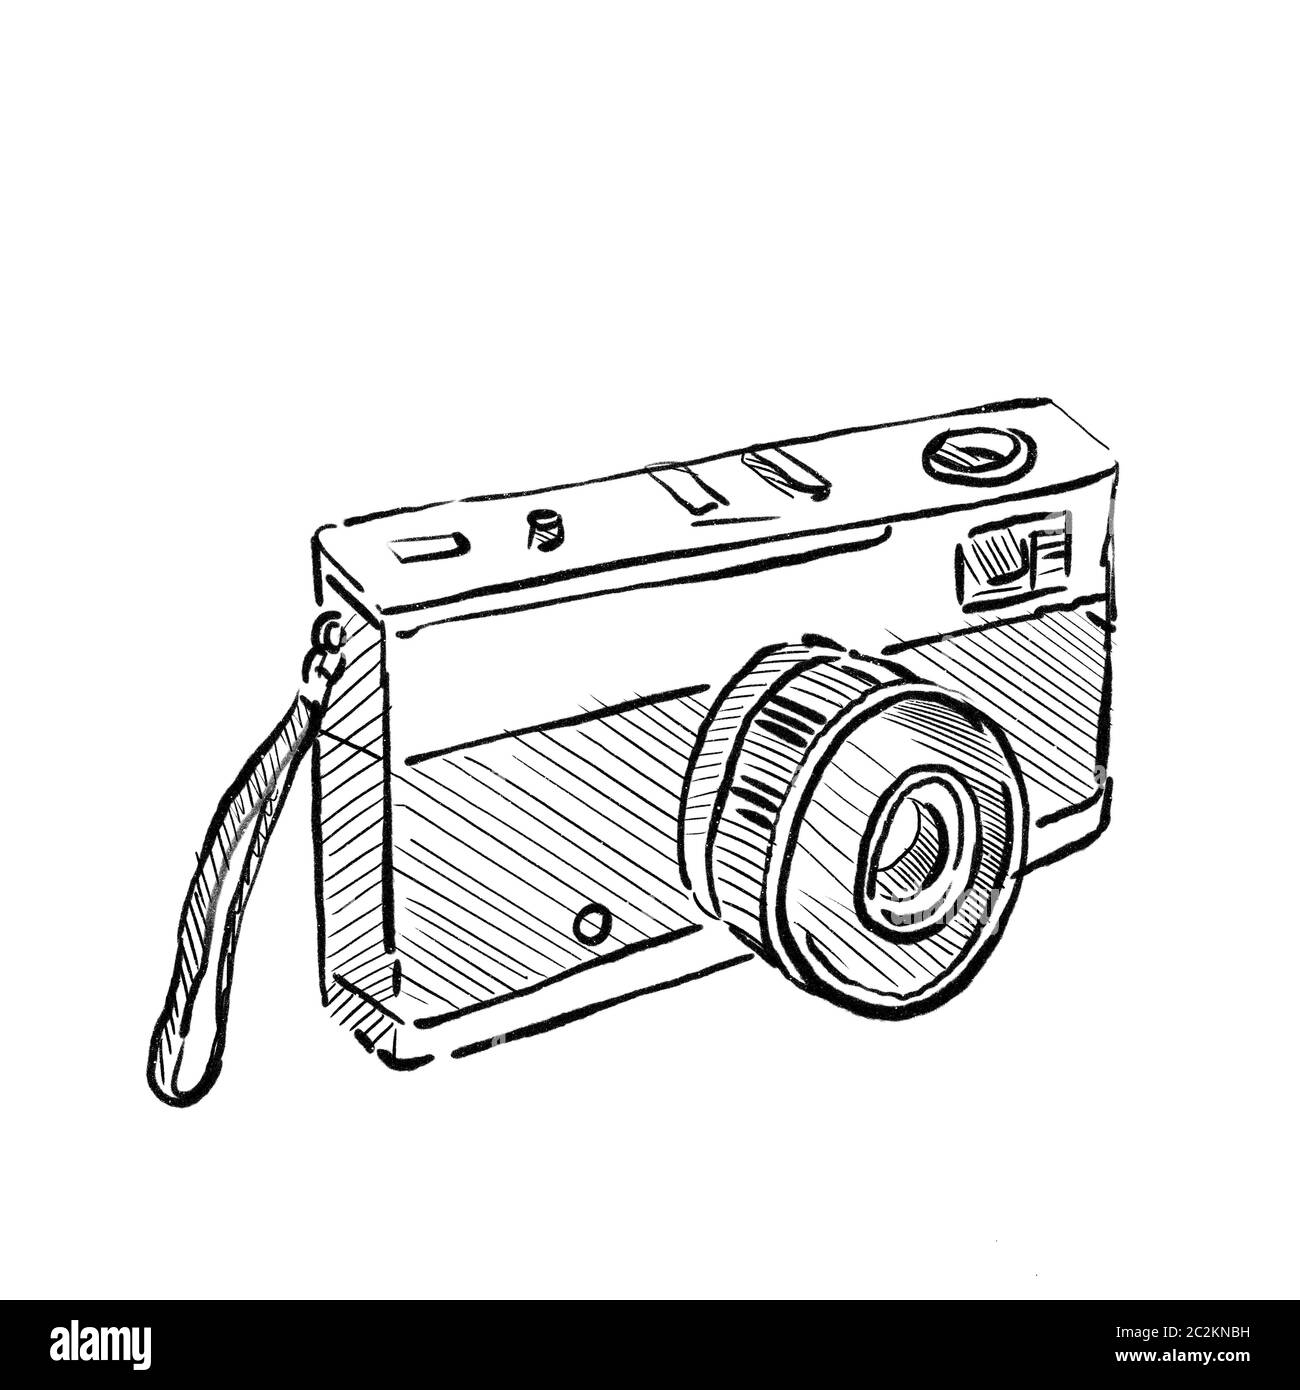 Drawing sketch style illustration of Vintage 35mm SLR Film Camera on isolated white background. Stock Photo